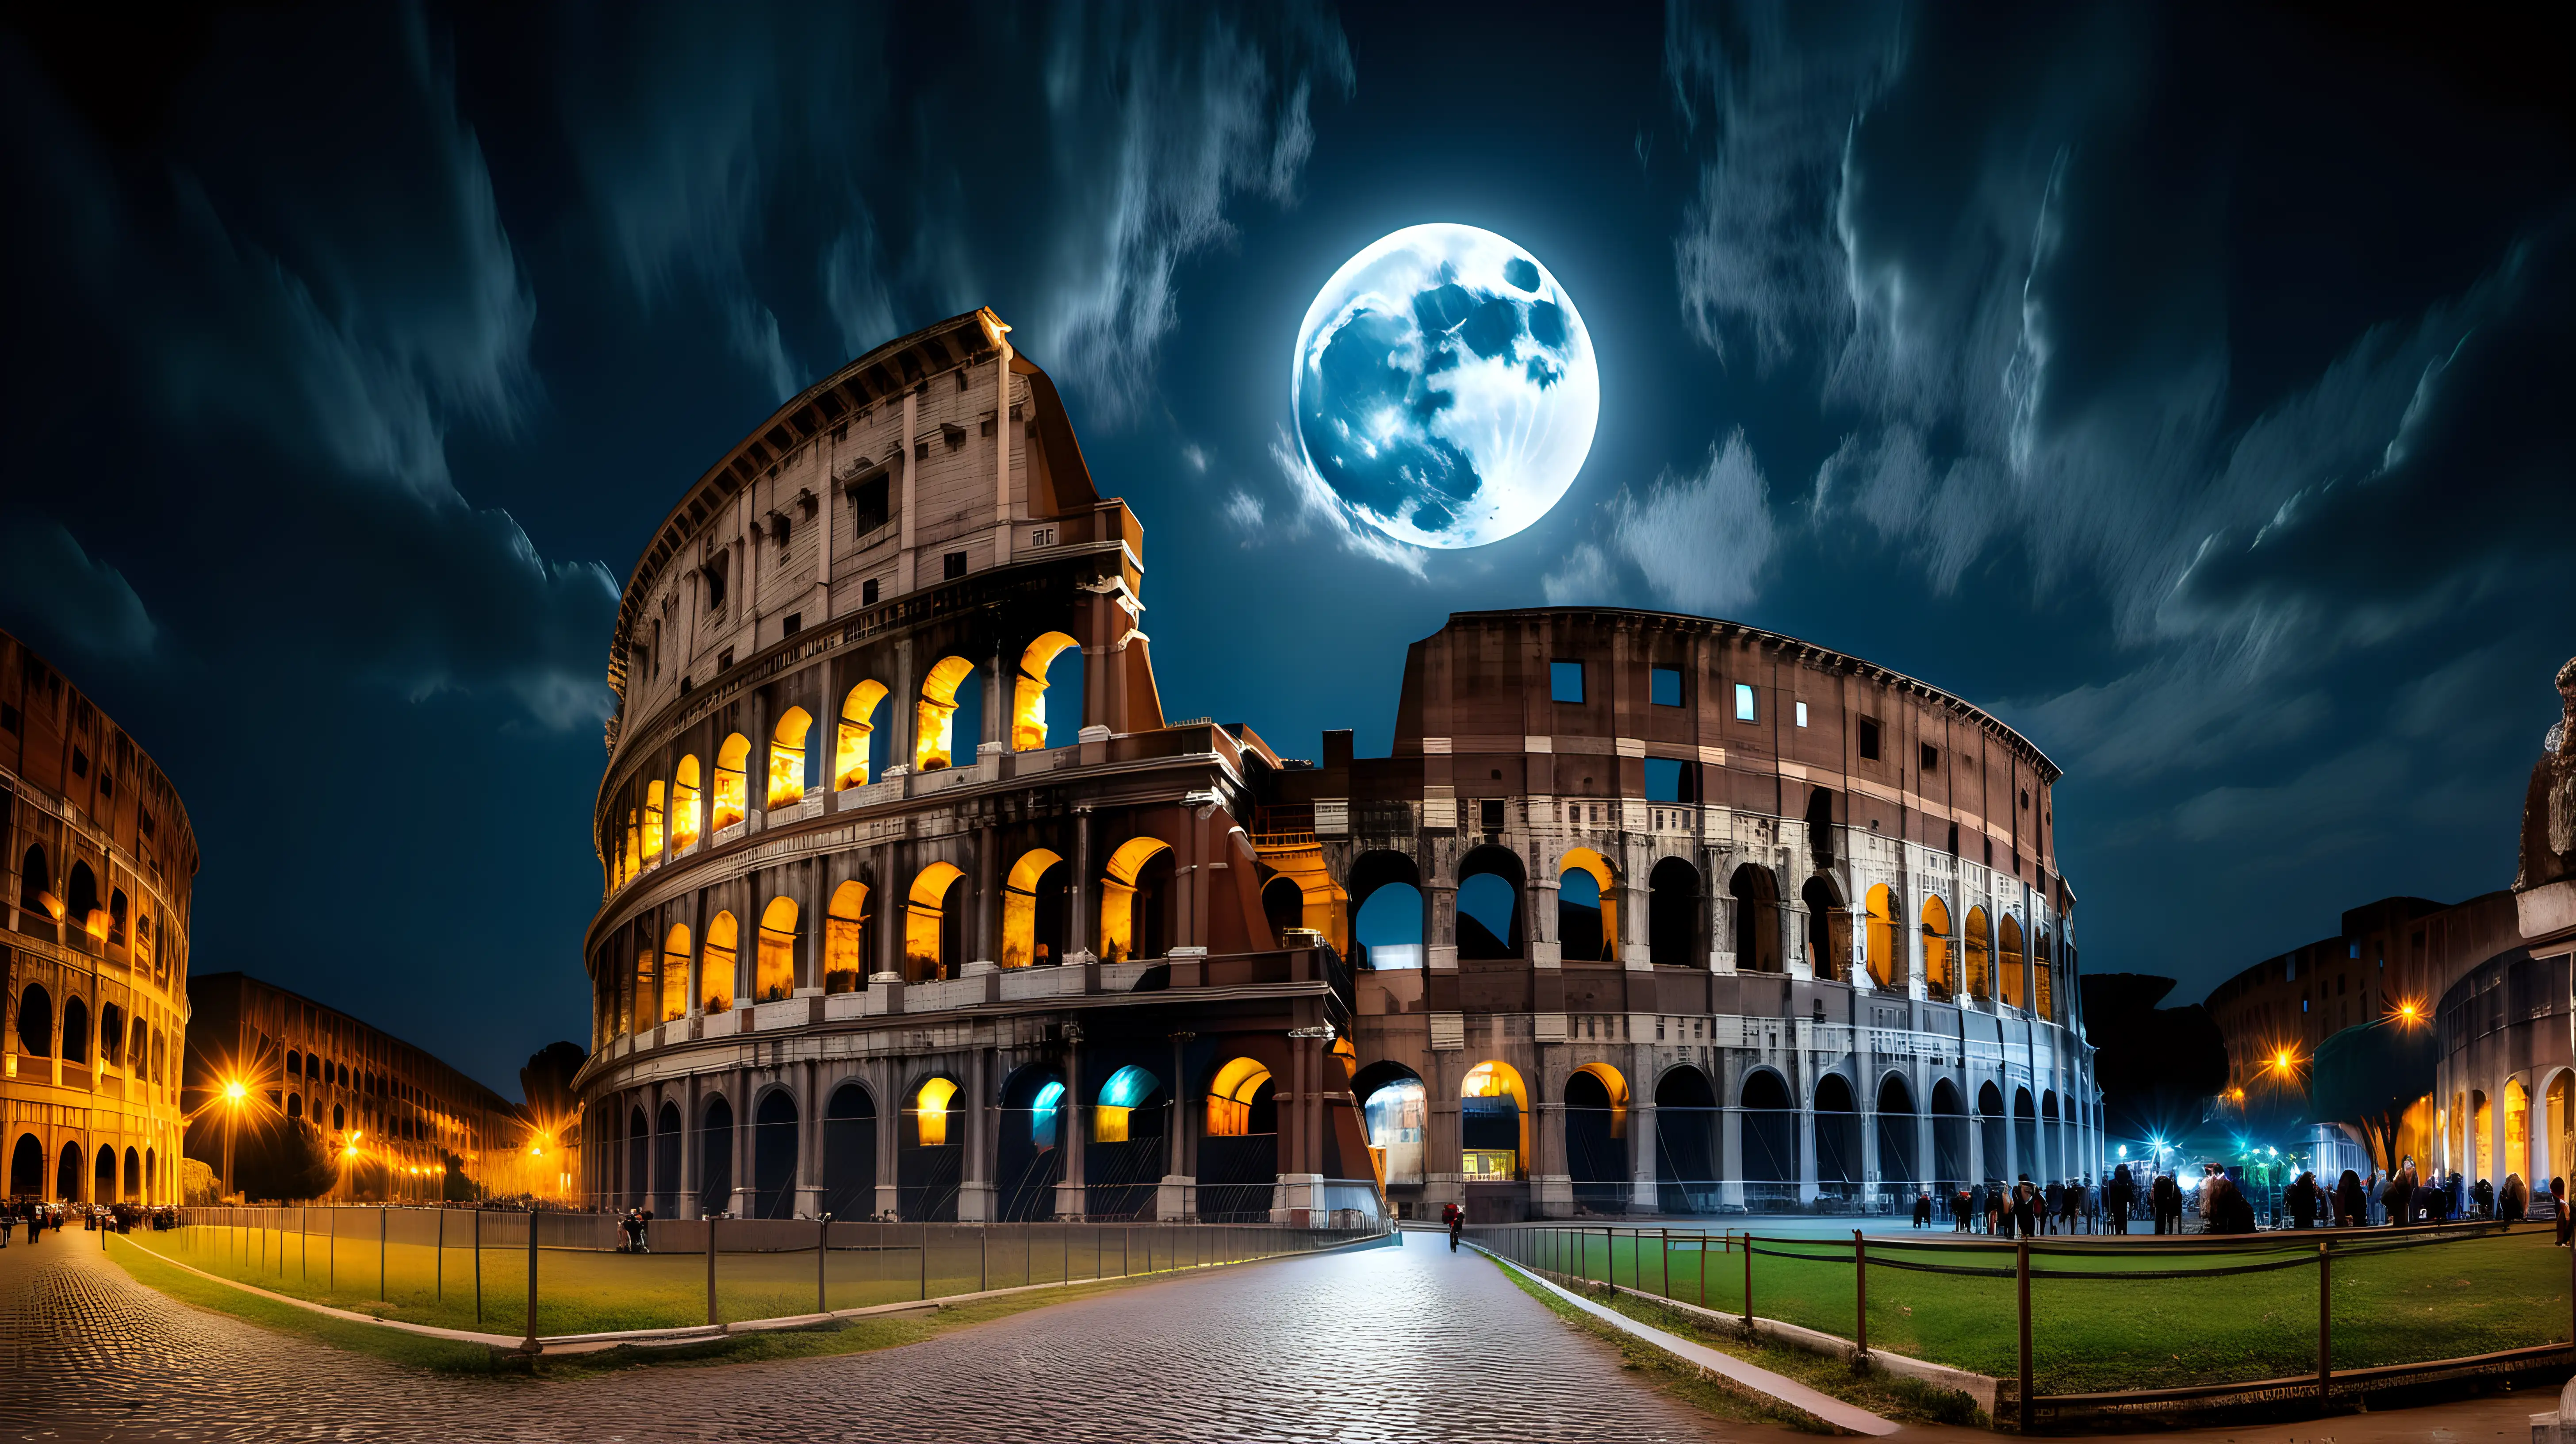 Ancient Roman Colosseum under Full Moon with Dramatic Clouds